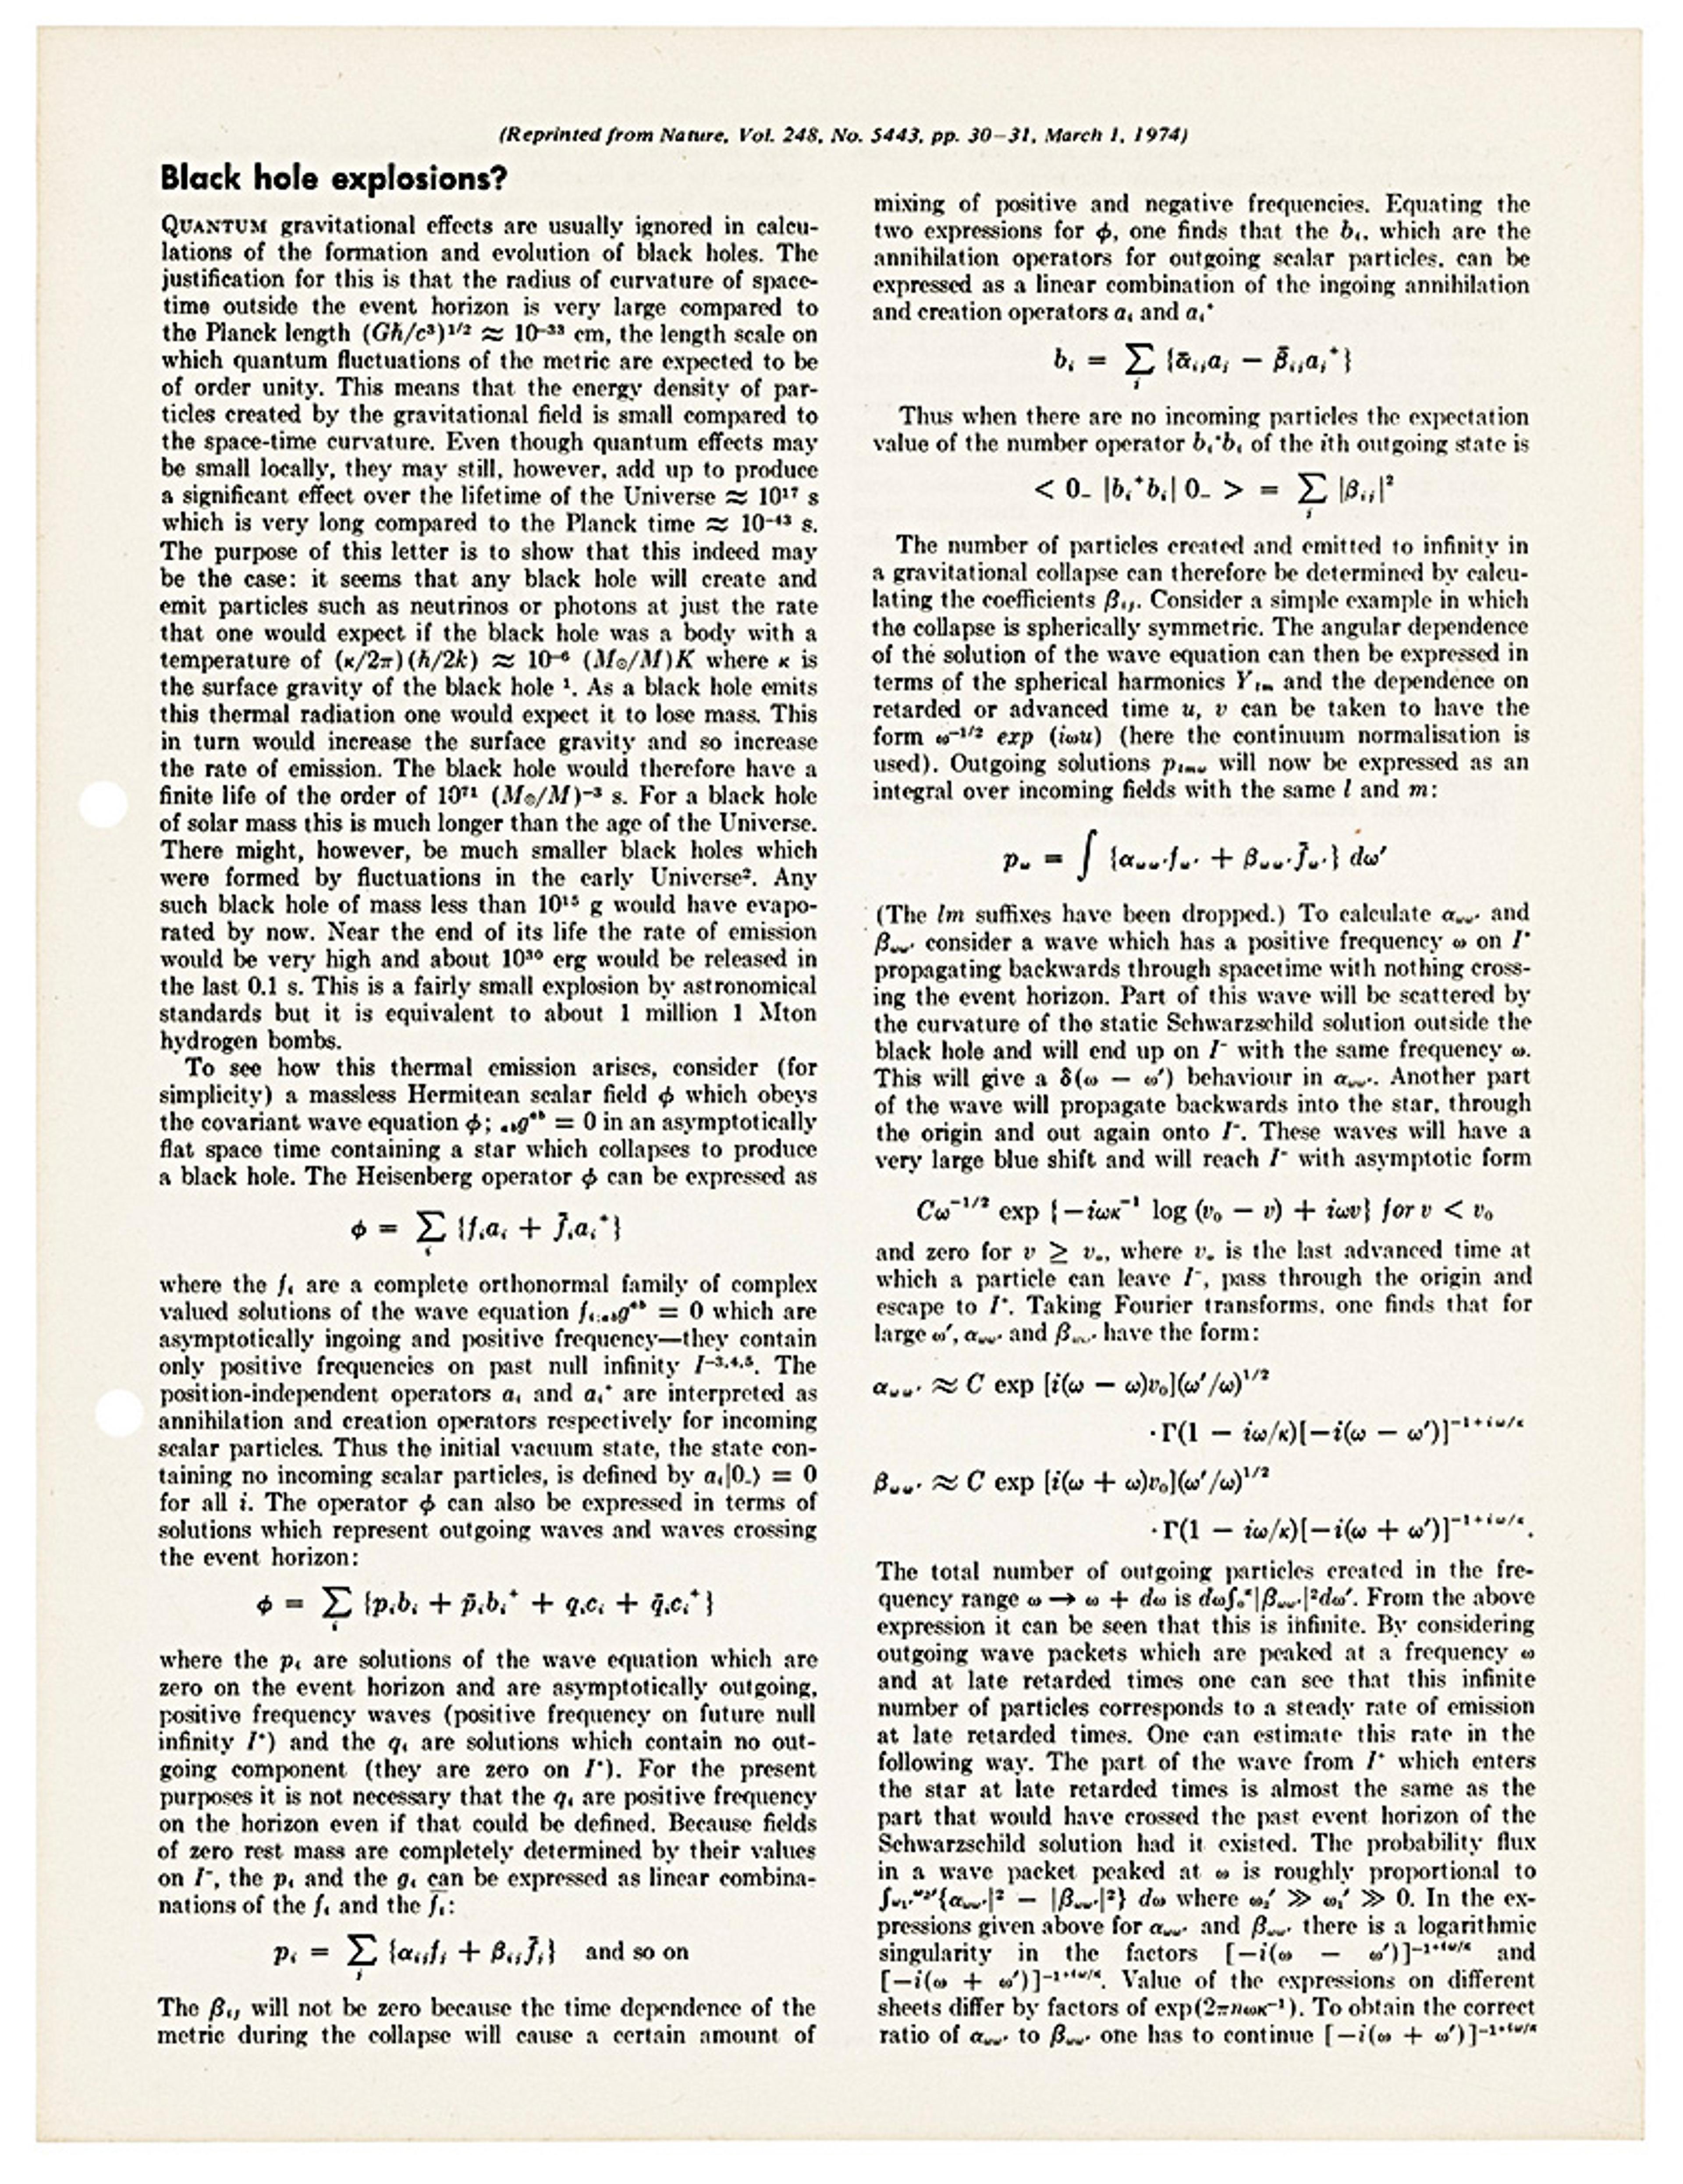 A scanned page from the journal Nature, Volume 248, Number 5443, dated March 1, 1974. The article is titled “Black hole explosions?” and discusses quantum gravitational effects, black hole radiation, and related mathematical equations and theories. The text includes paragraphs and mathematical formulas.